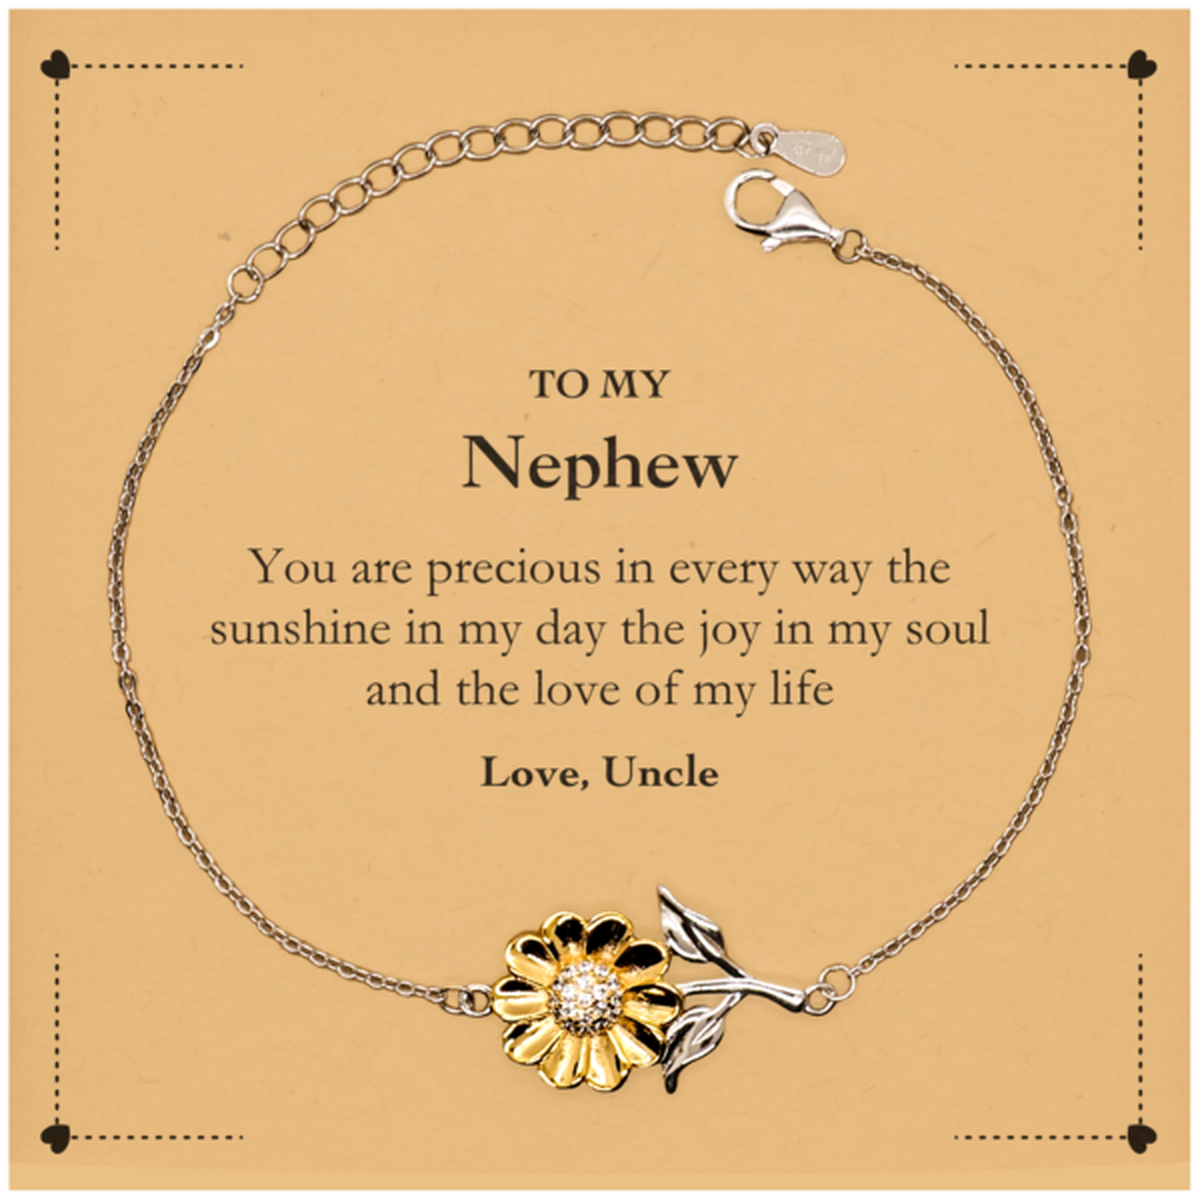 Graduation Gifts for Nephew Sunflower Bracelet Present from Uncle, Christmas Nephew Birthday Gifts Nephew You are precious in every way the sunshine in my day. Love, Uncle